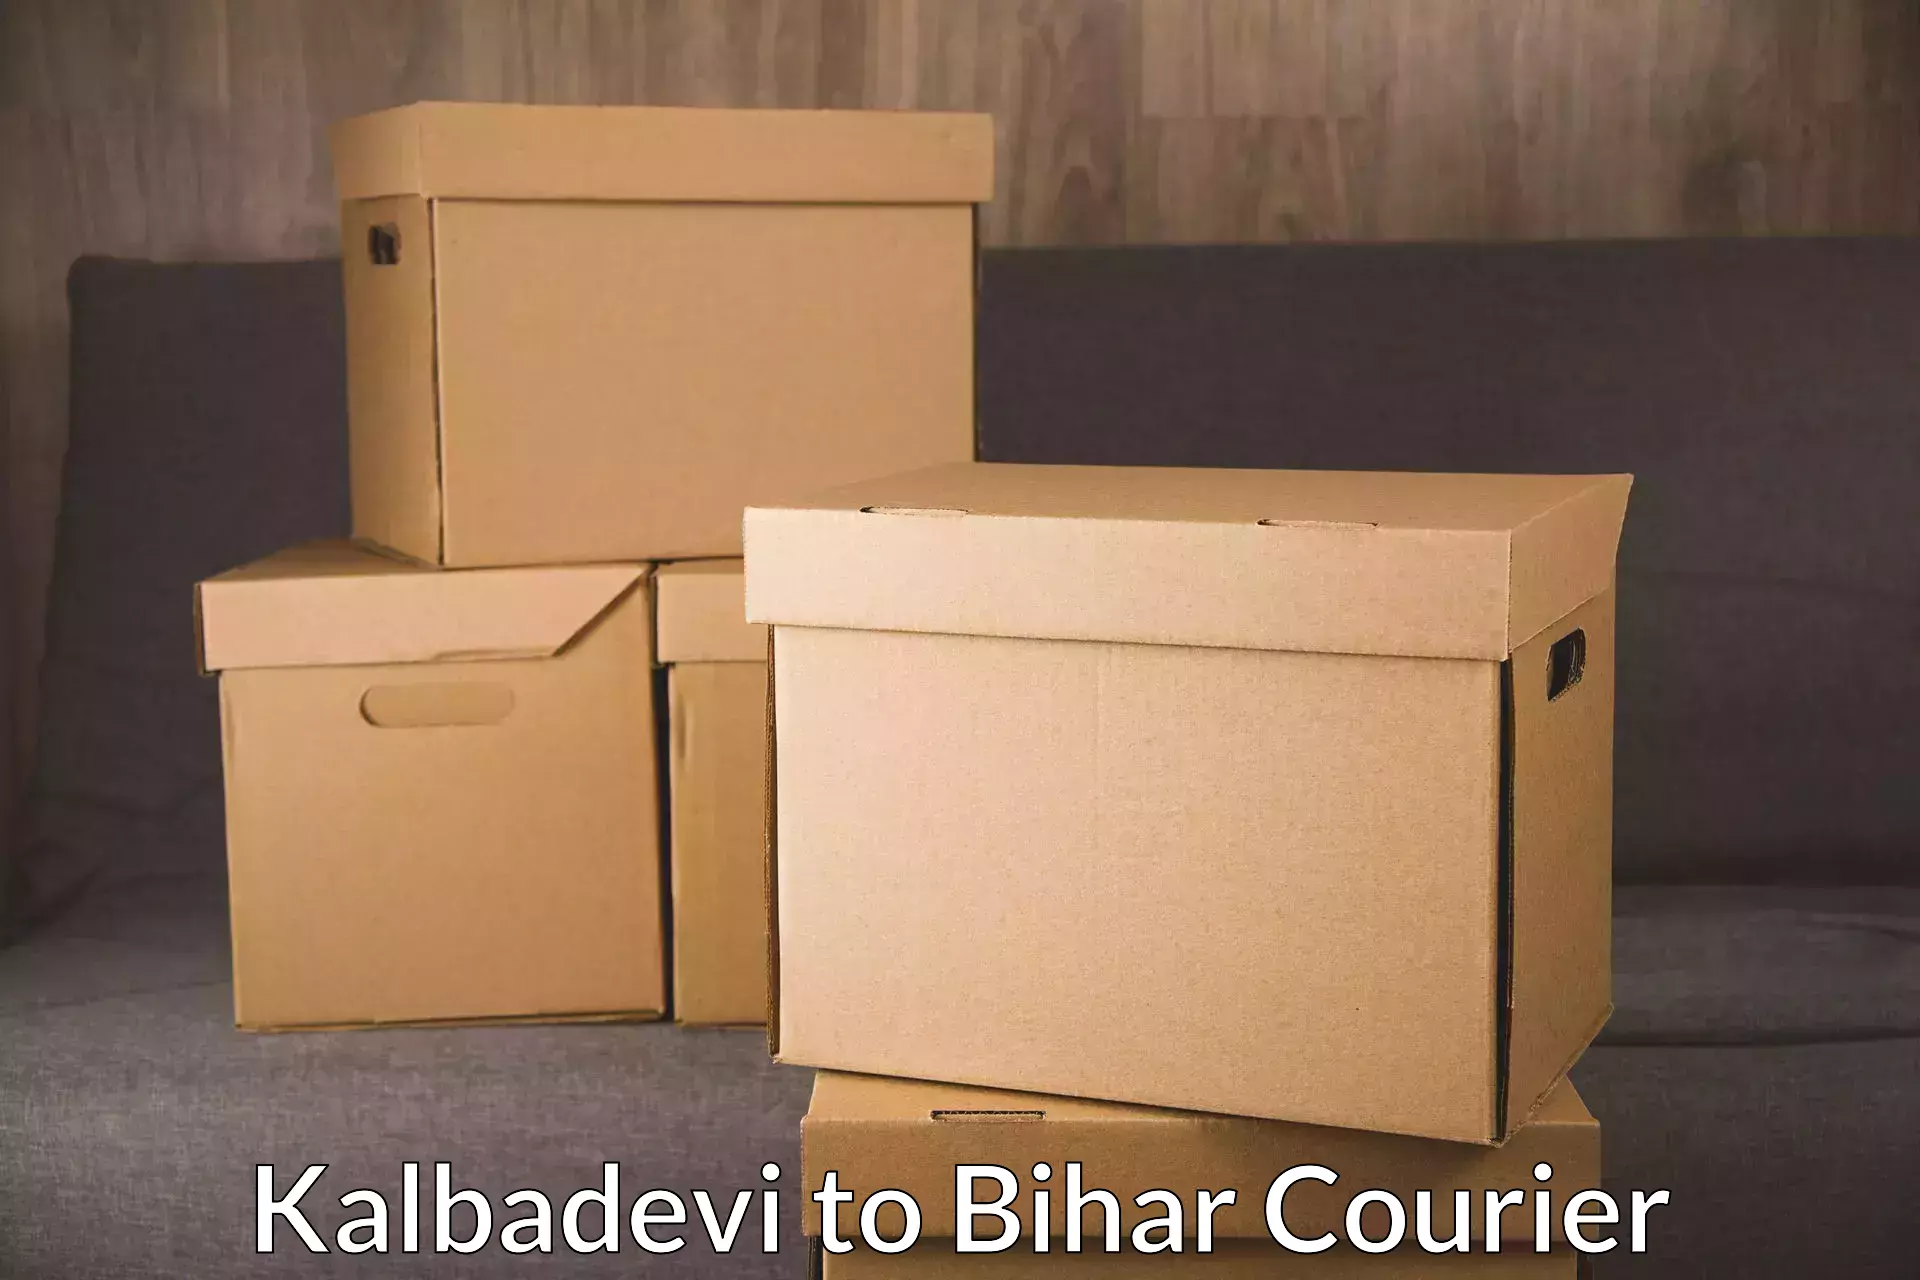 Express package services Kalbadevi to Bhojpur